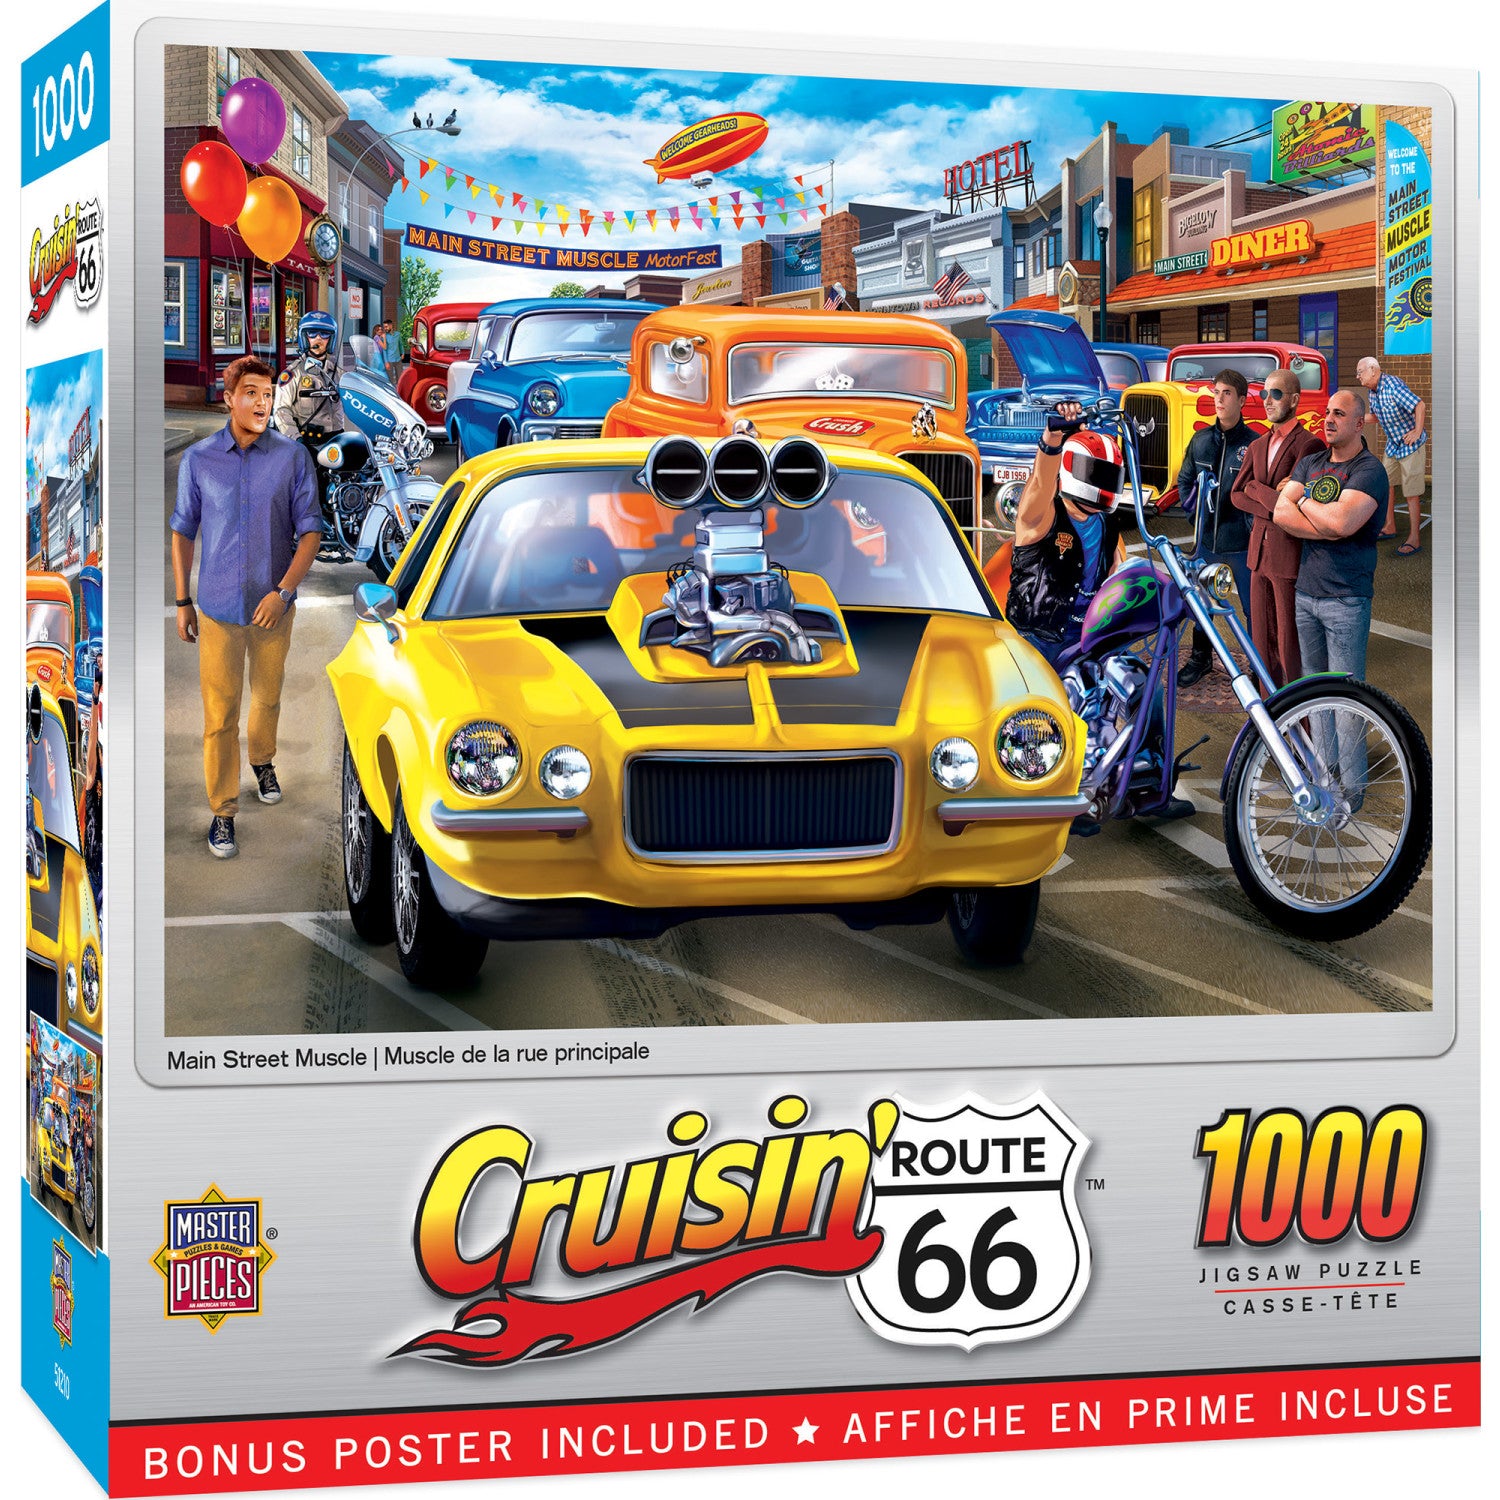 Cruisin' Route 66 - Main Street Muscle 1000 Piece Puzzle